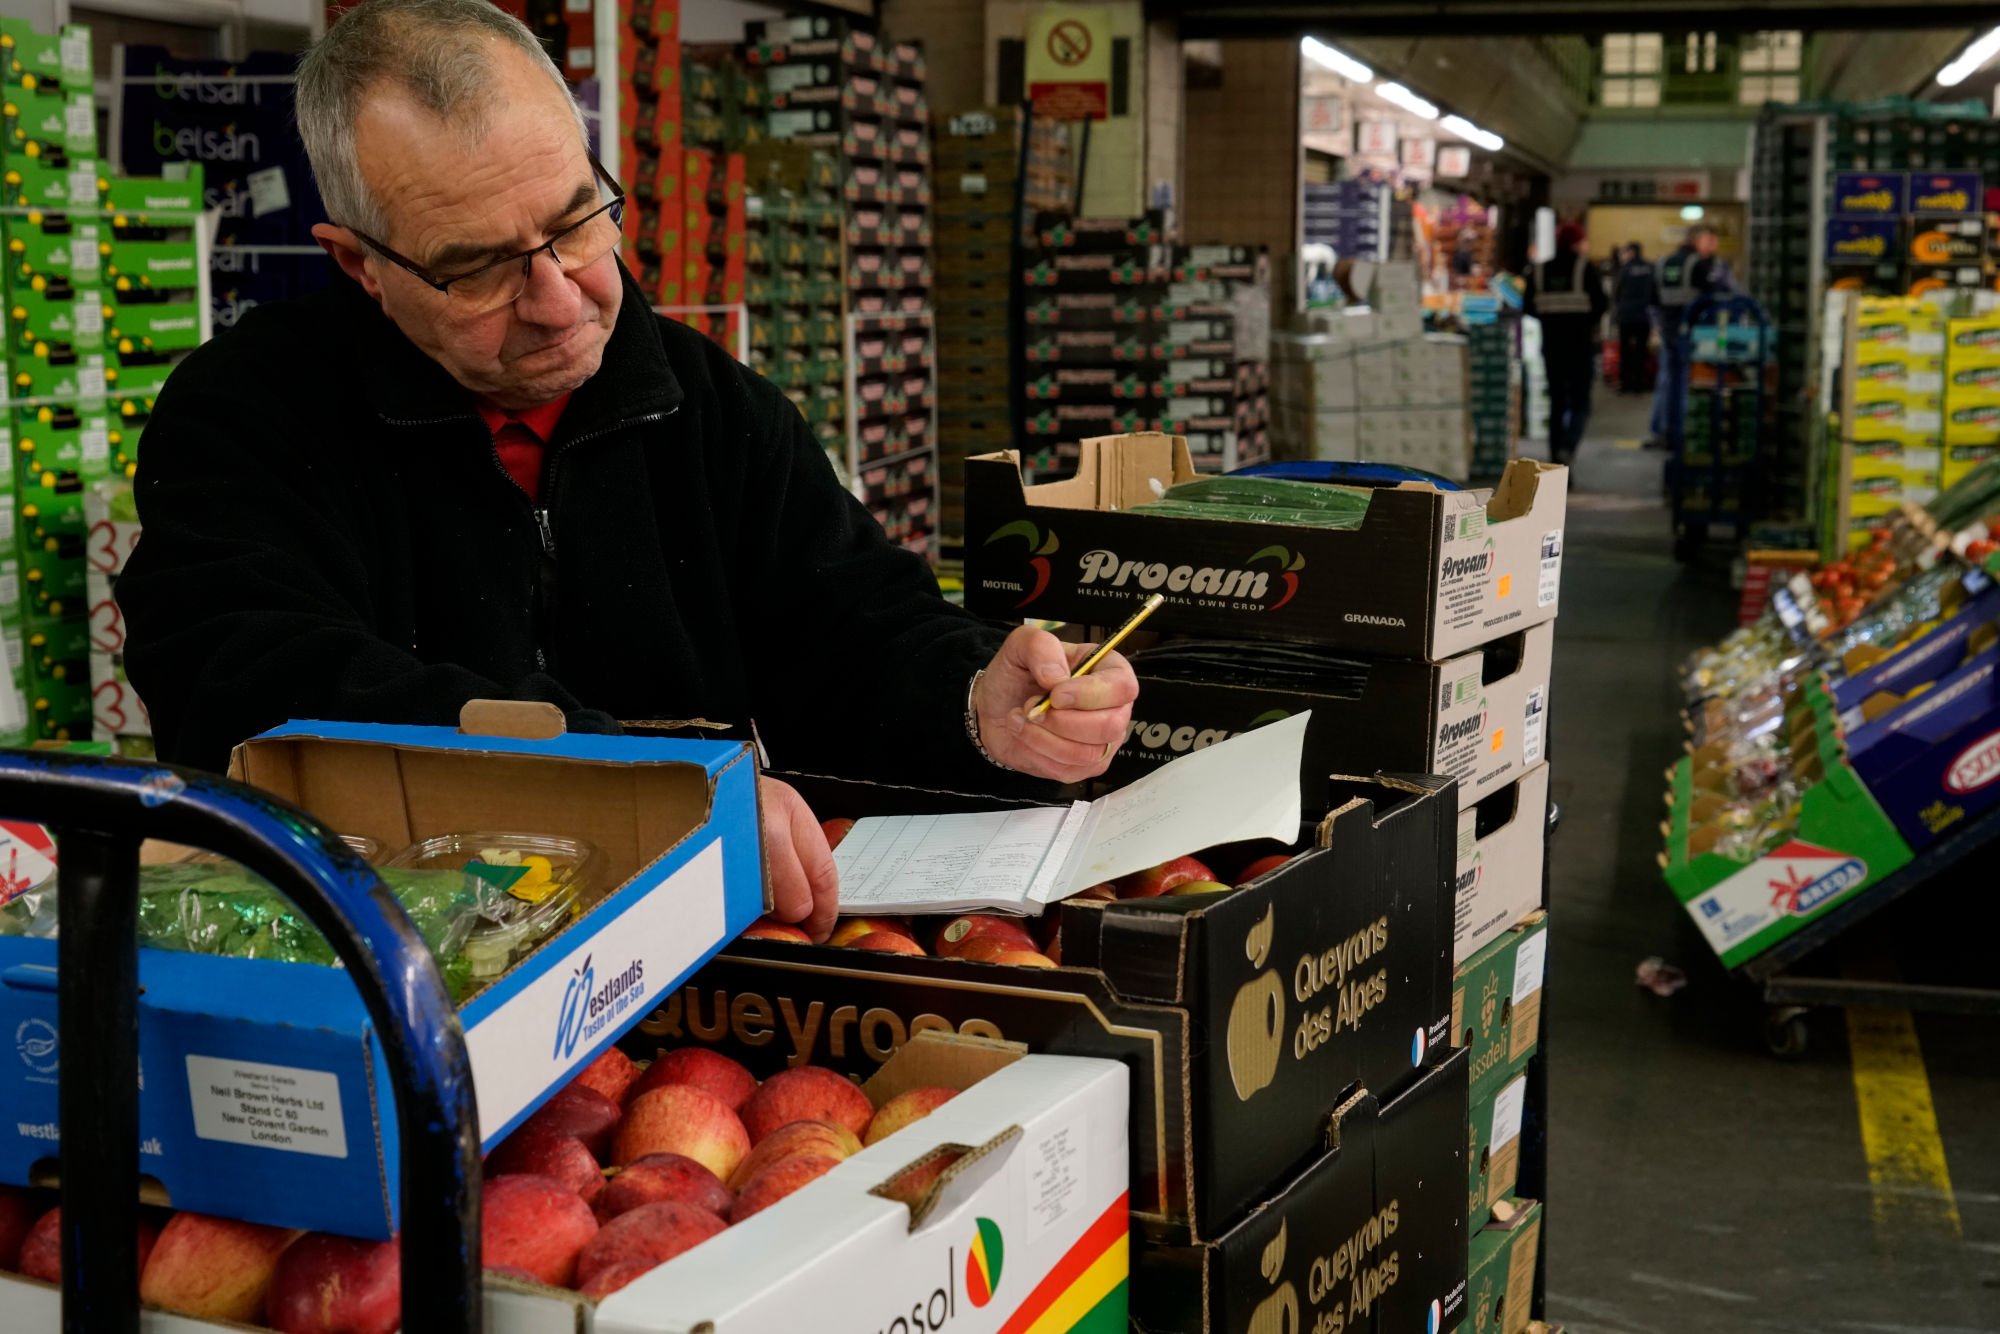 Our Procurement Director, surrounded by the high quality fruit he has examined, with over 50 years of experience in the industry.